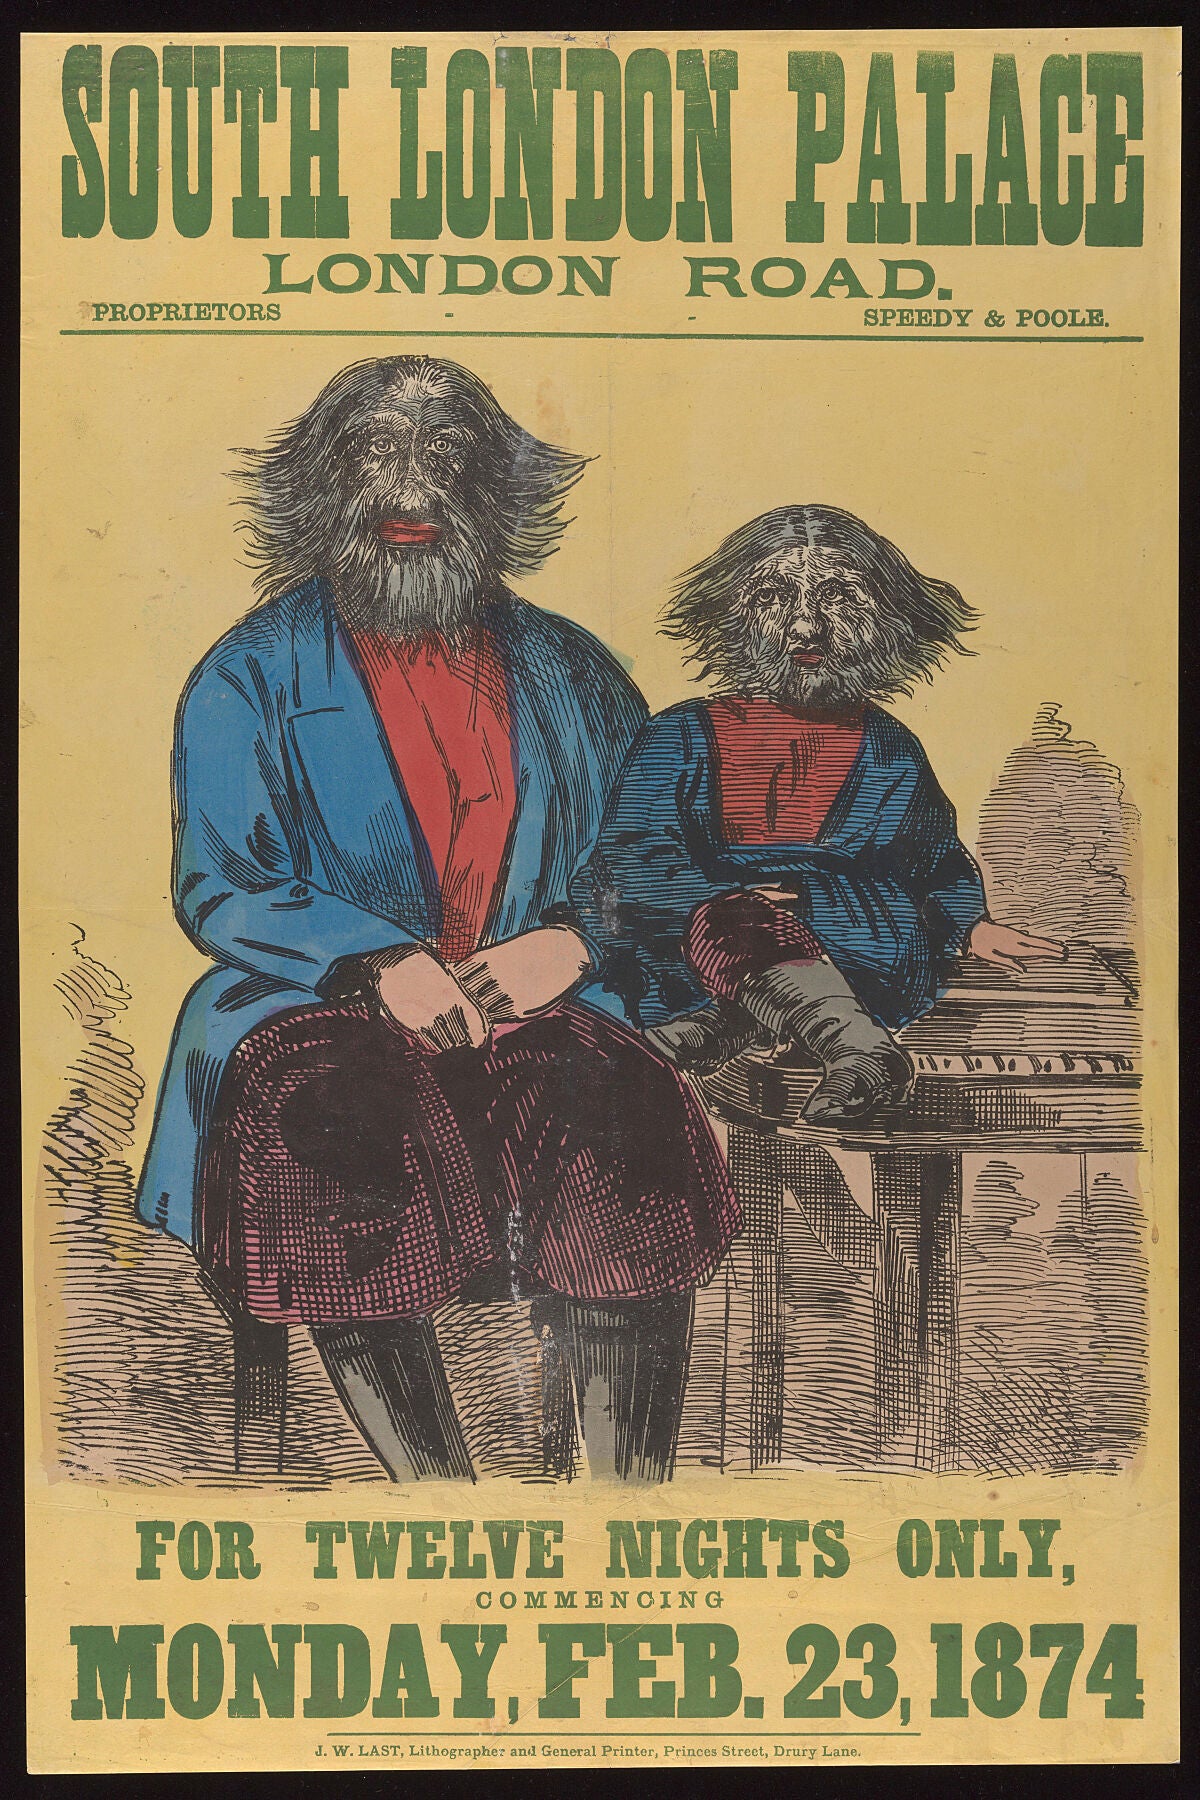 Colour poster advertising an appearance at a freakshow or as part of a variety night by a man and boy (Adrian and Feodor, the 'Kostroma people' from Russia) both of whom were suffering from extreme hypertrichosis of the face.